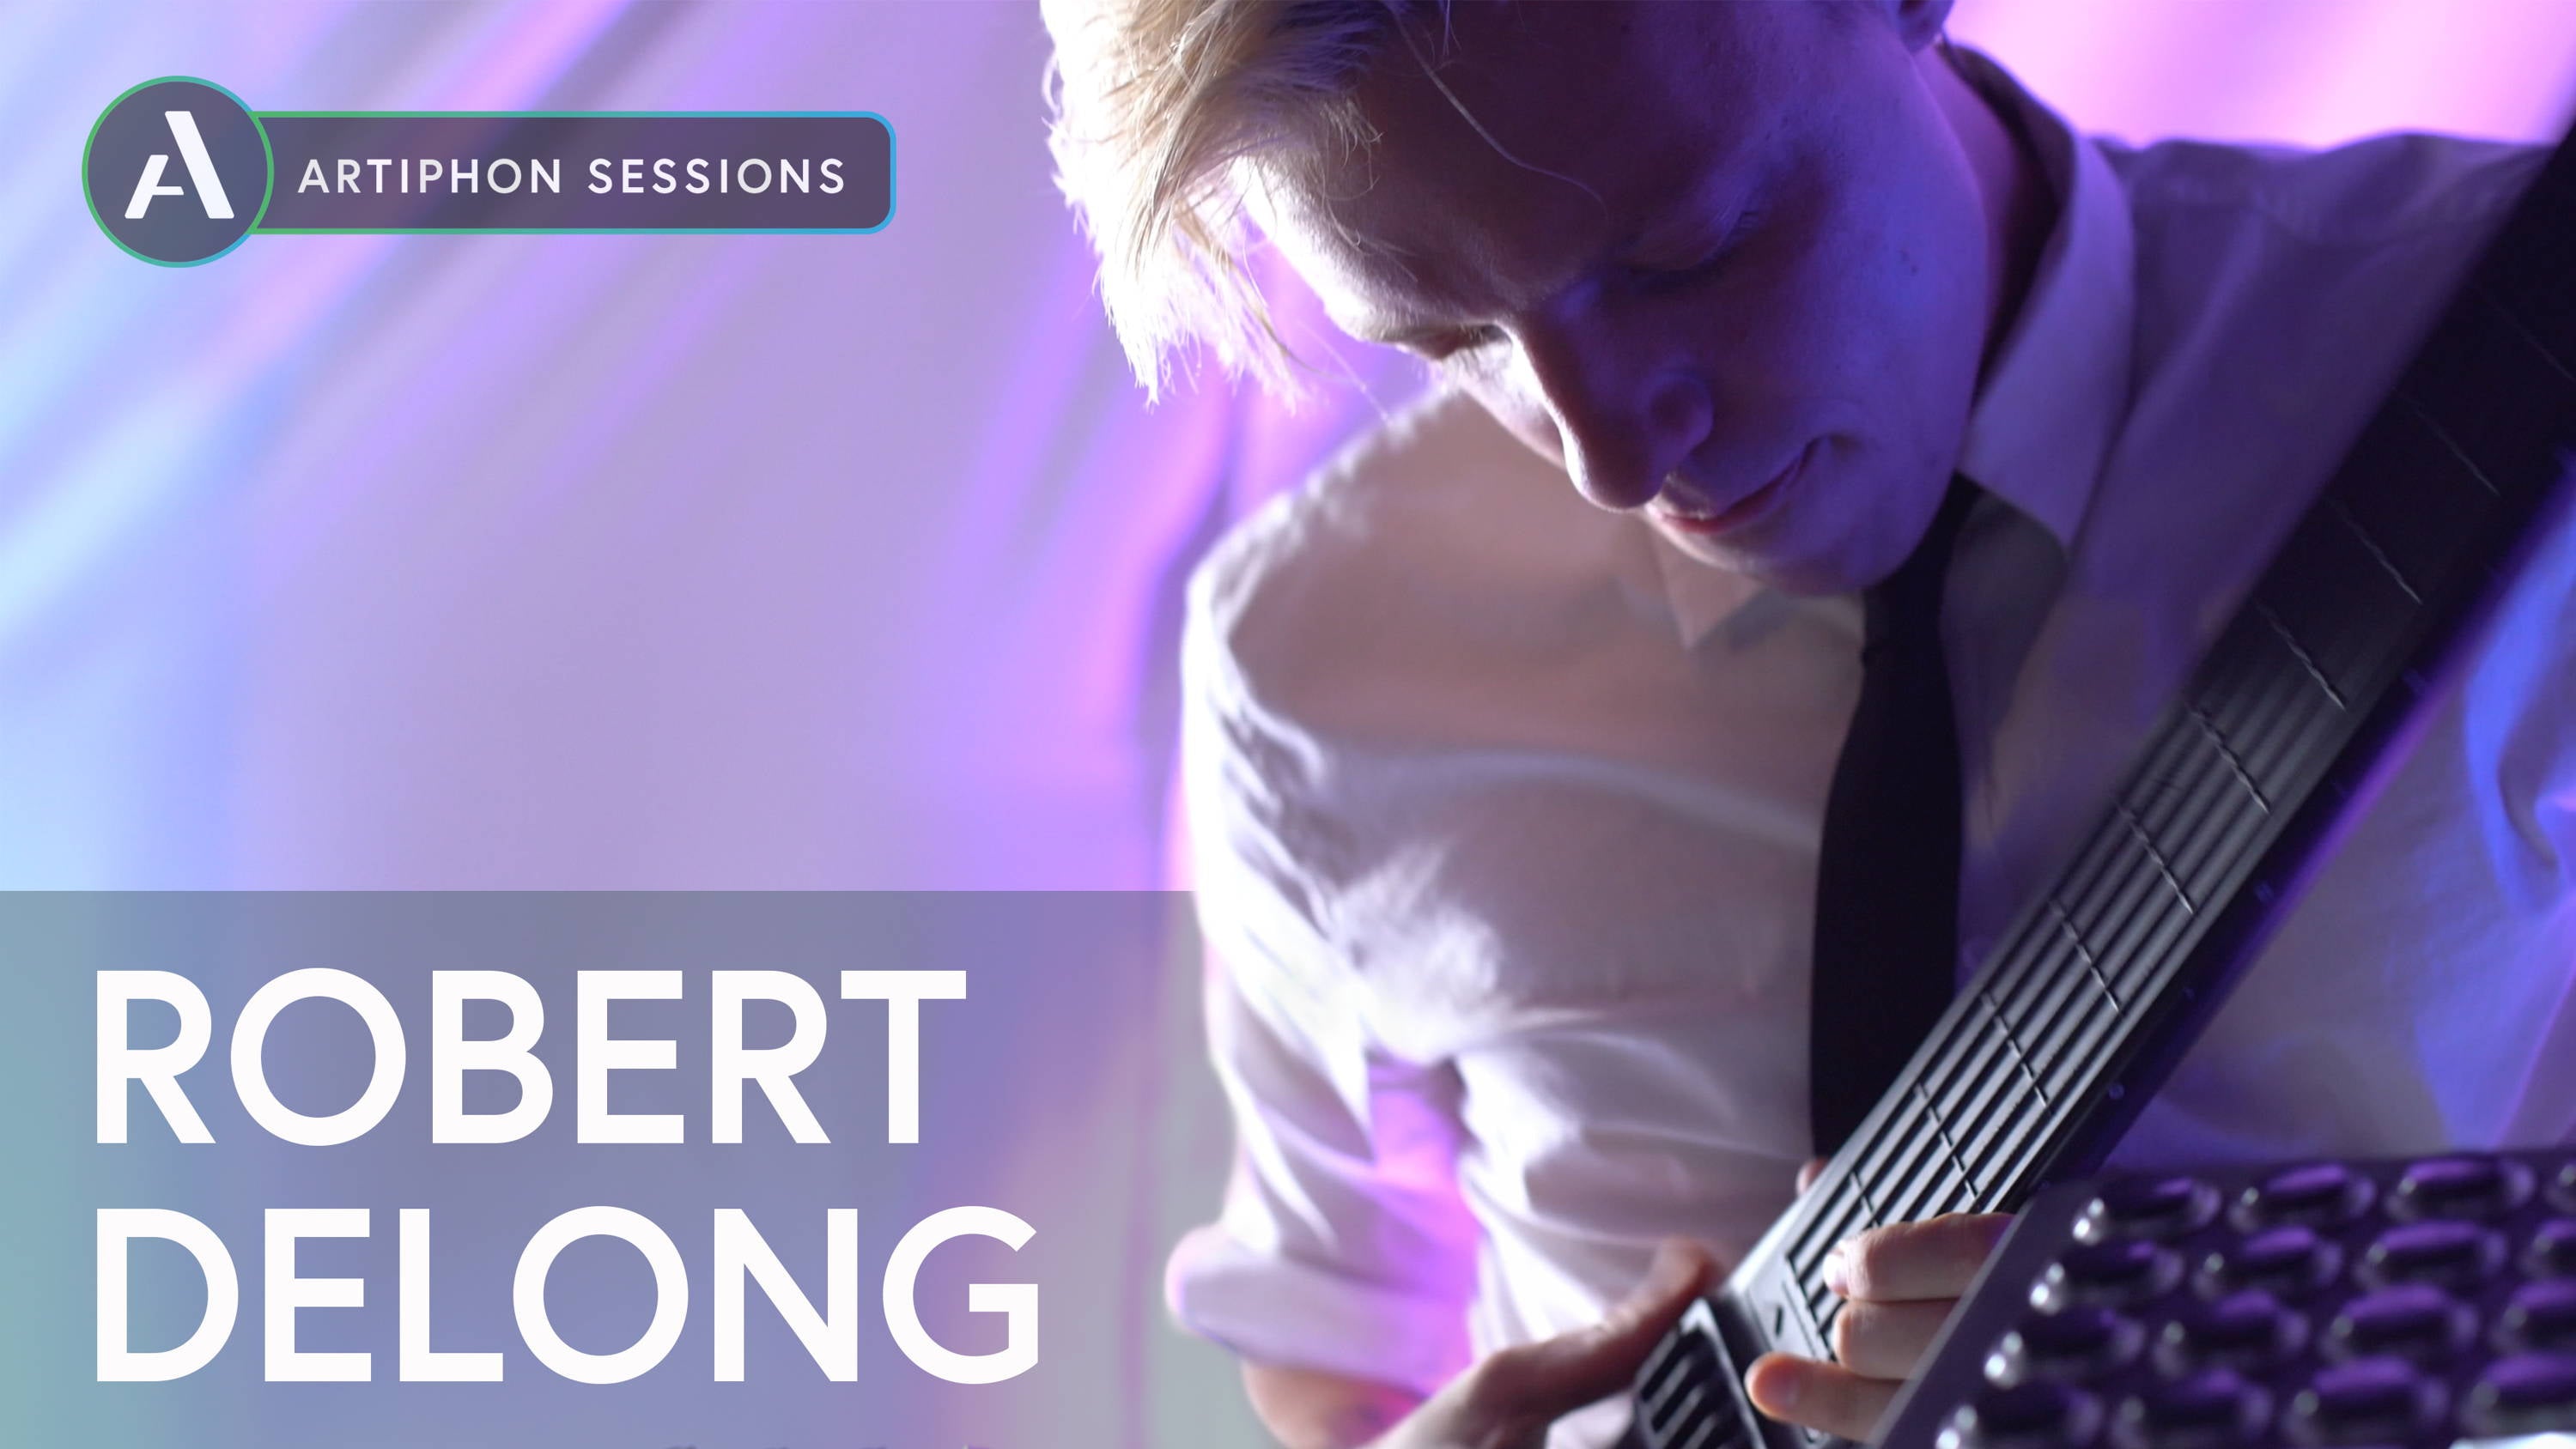 Aritphon Sessions: Robert DeLong – One Shot, One Take (Performance Video)